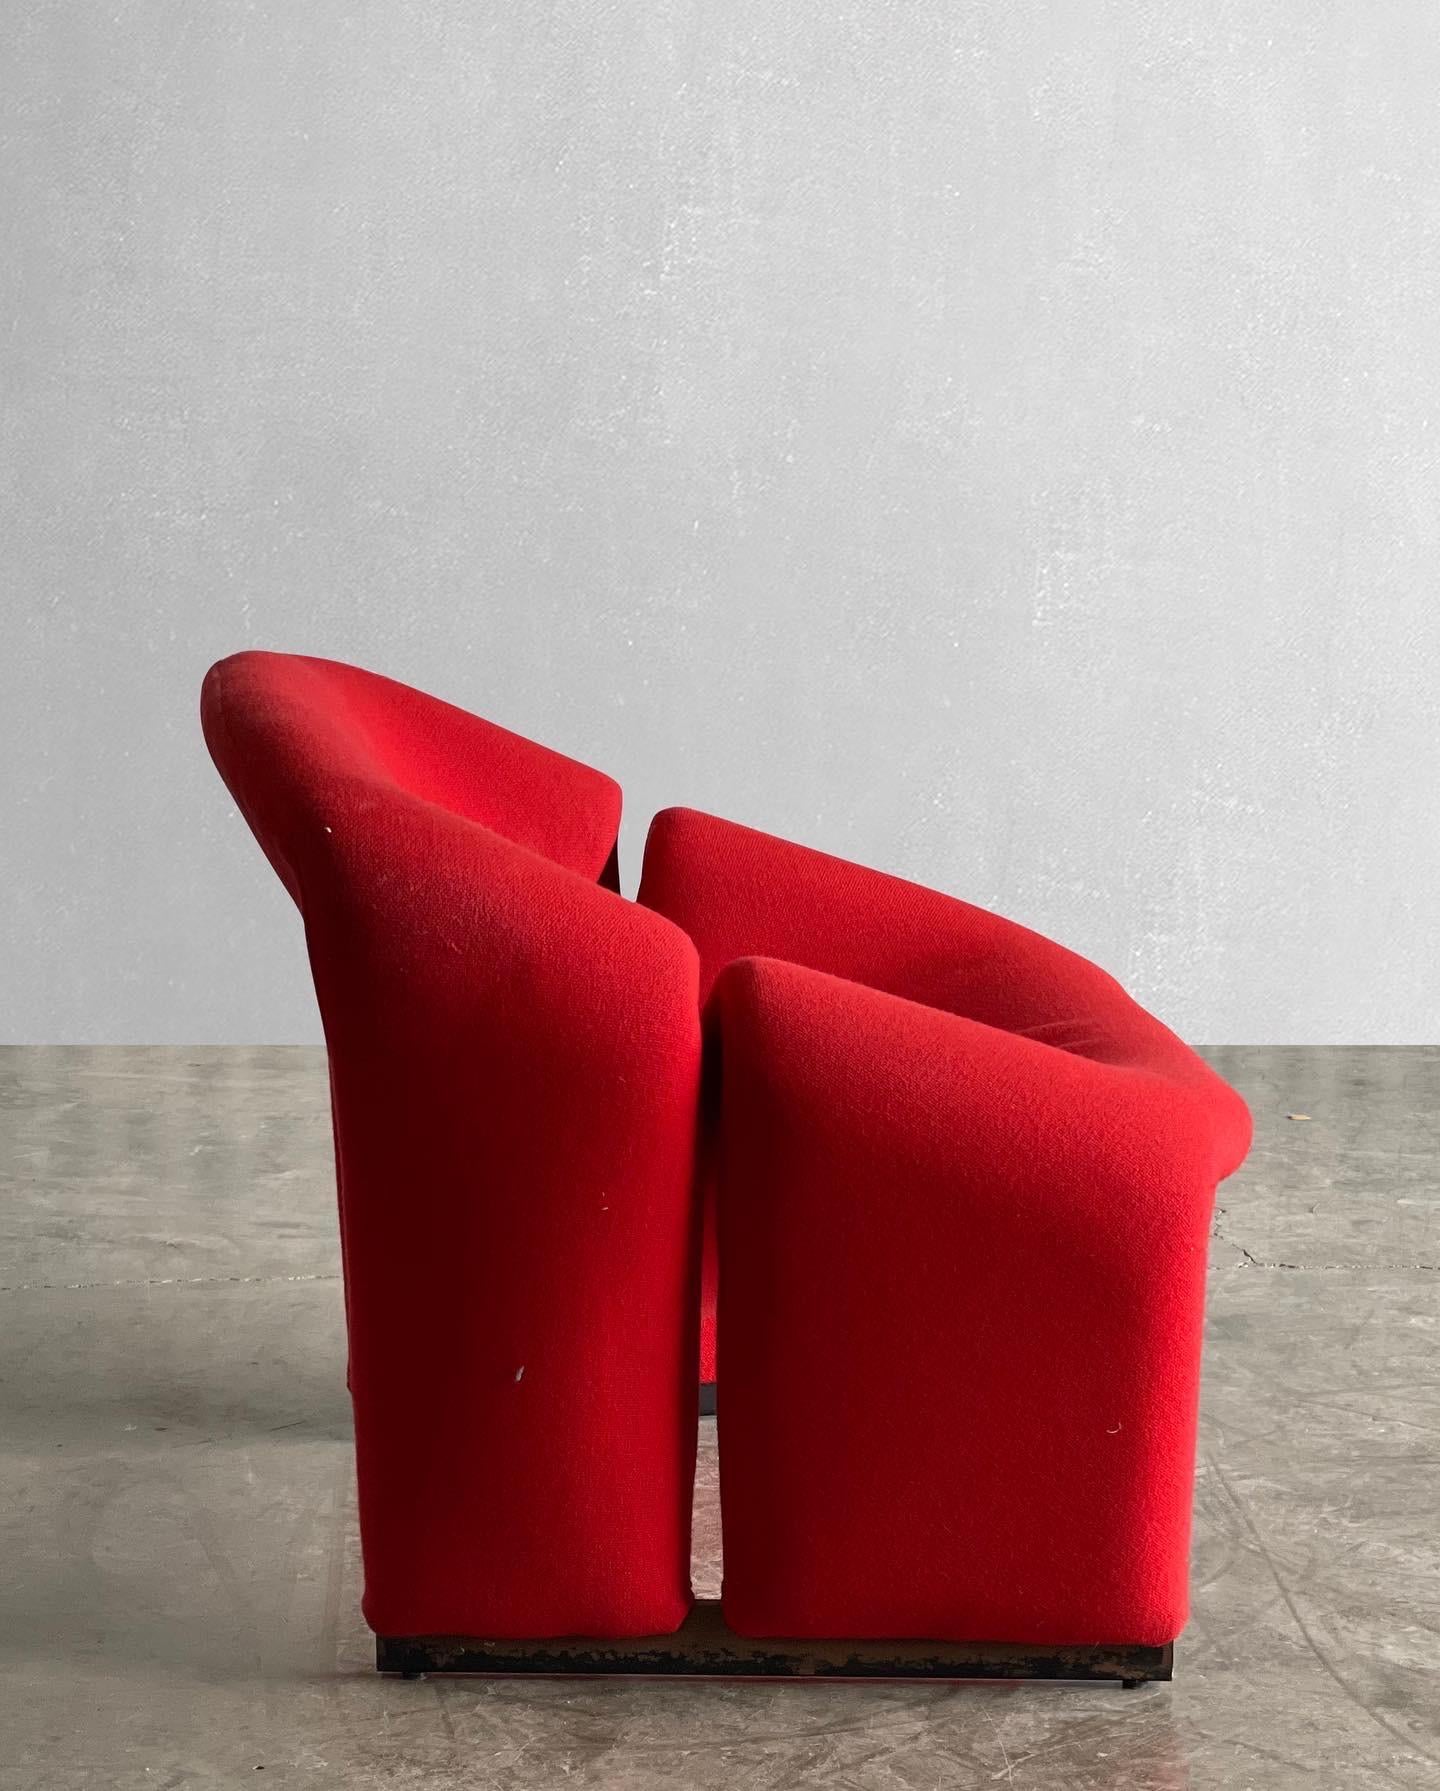 The groovy chairs are super iconic. Known for their sculptural shape, they sit extremely comfortably as well. Available, we have a pair of 1st edition Groovy chairs designed by Pierre Paulin for Artifort in 1966.

A 1st edition groovy chair is